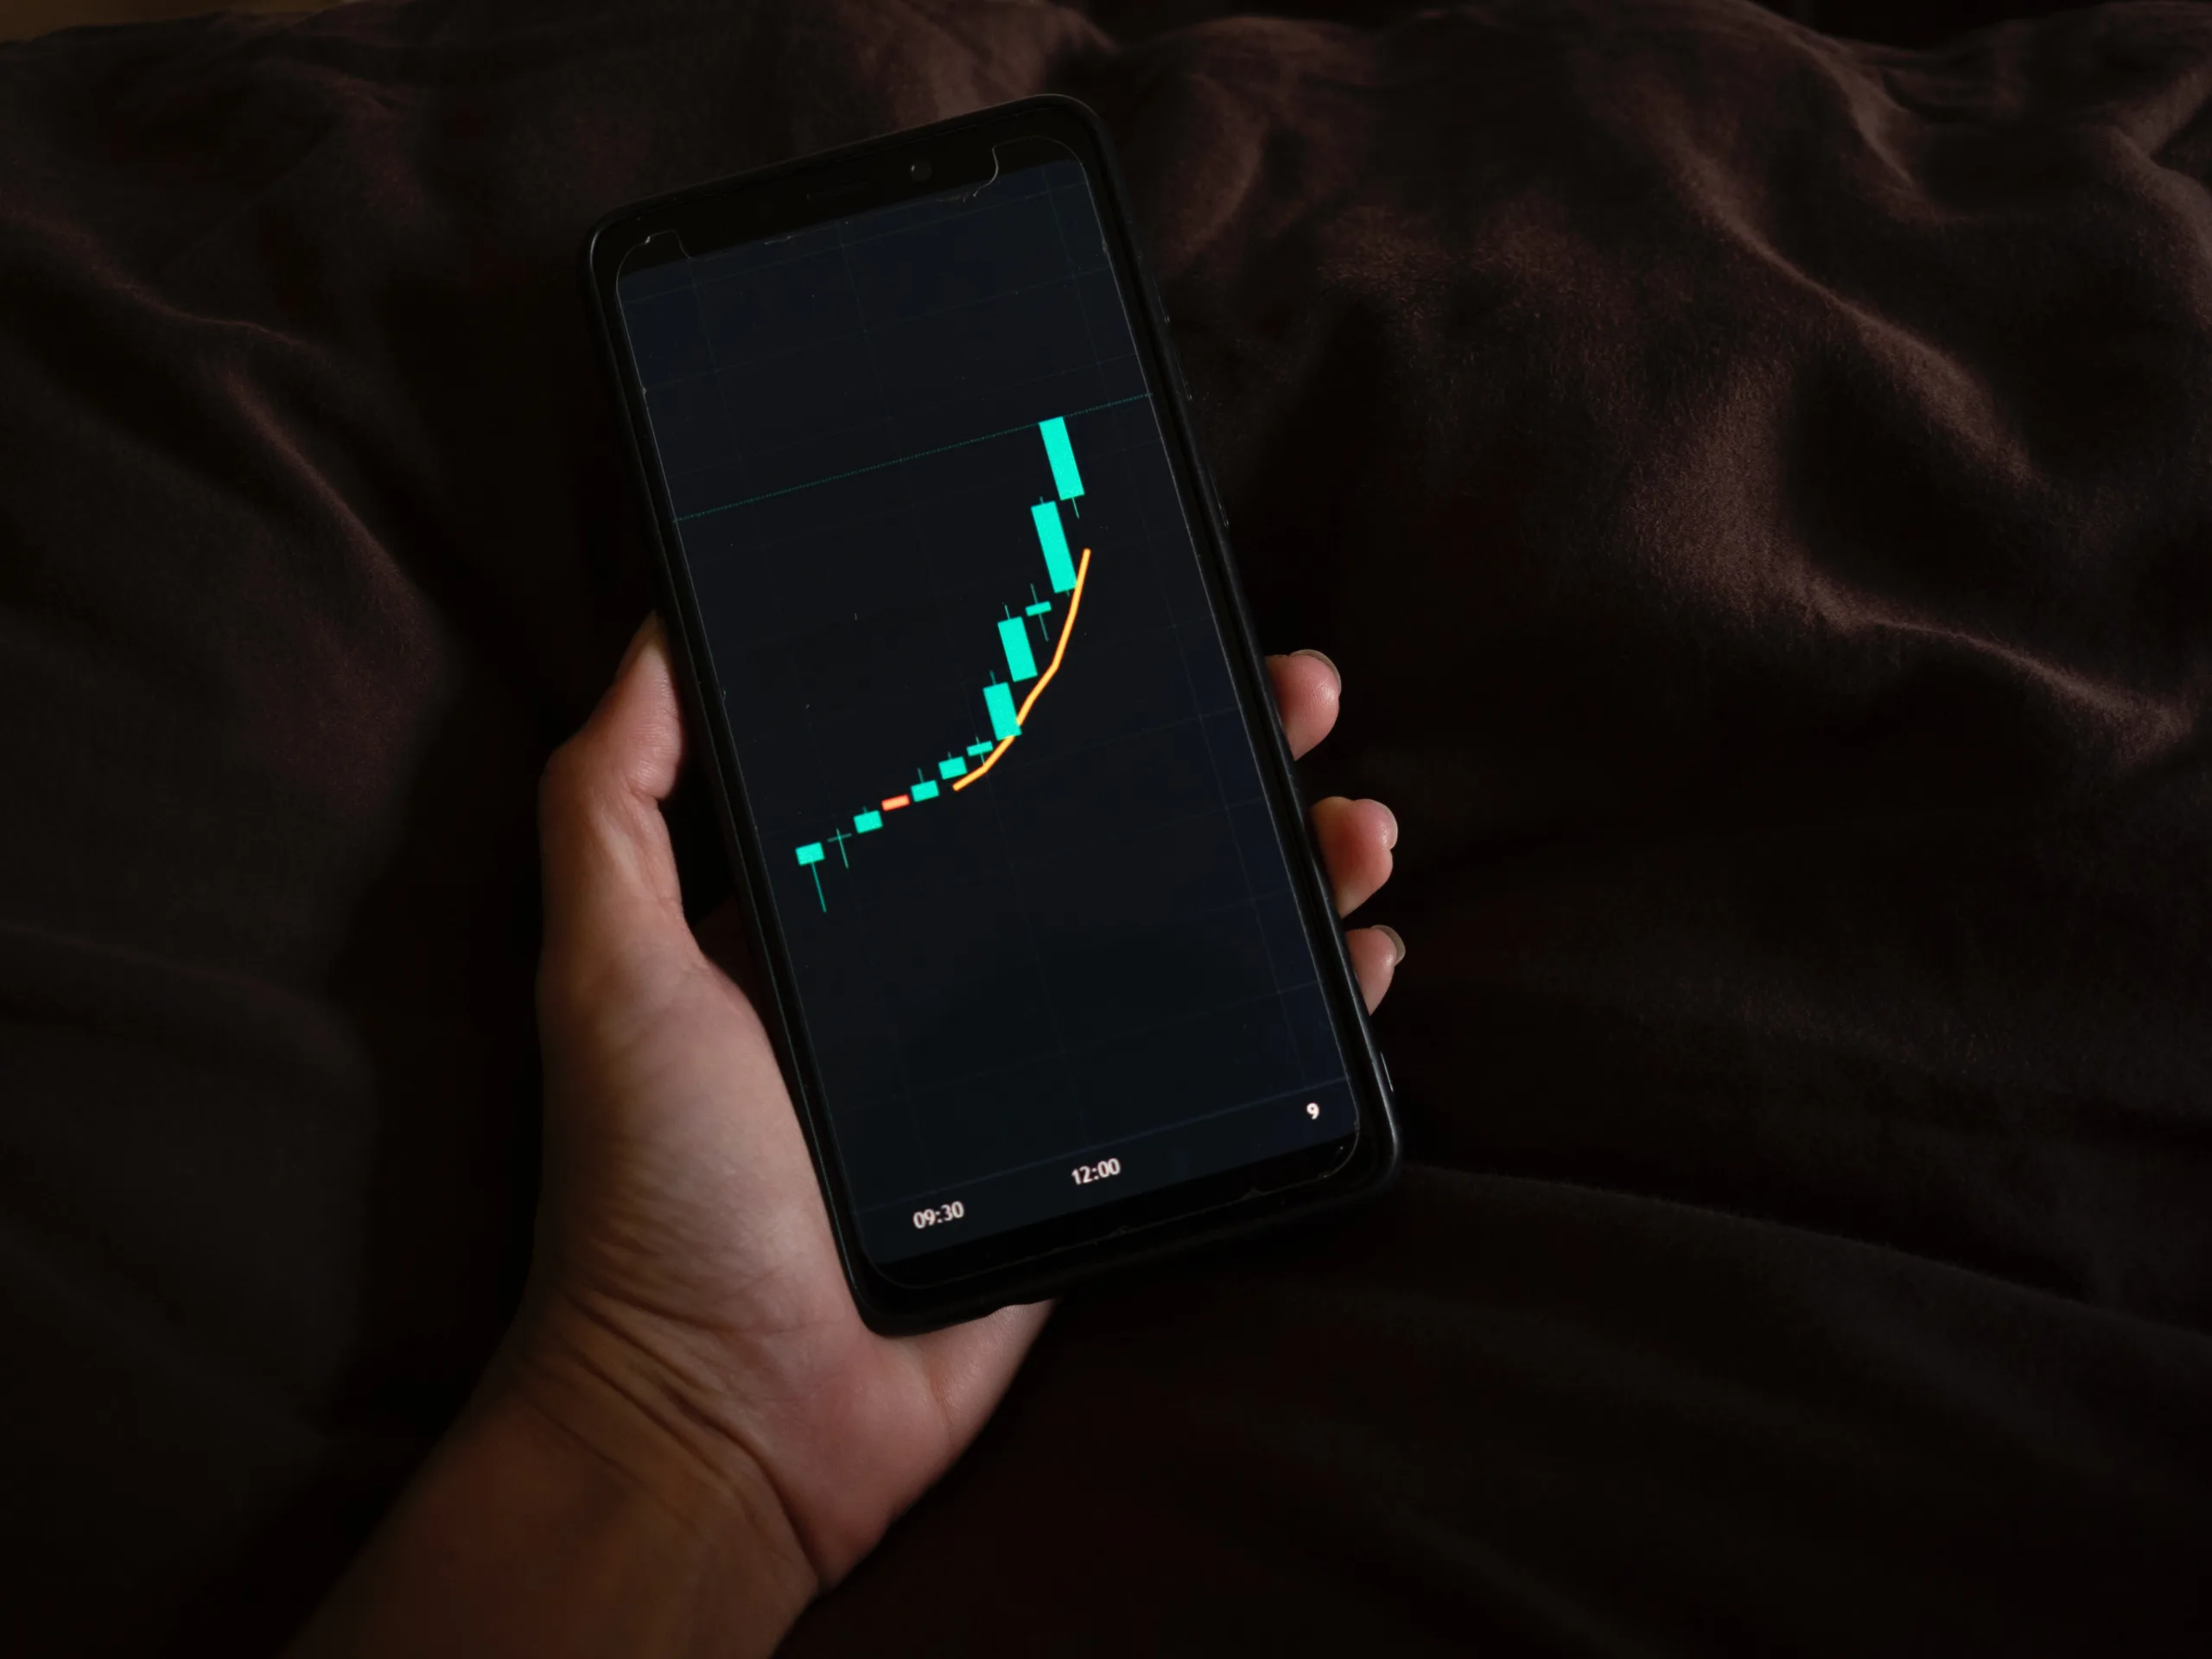 Phone in a hand with trending chart